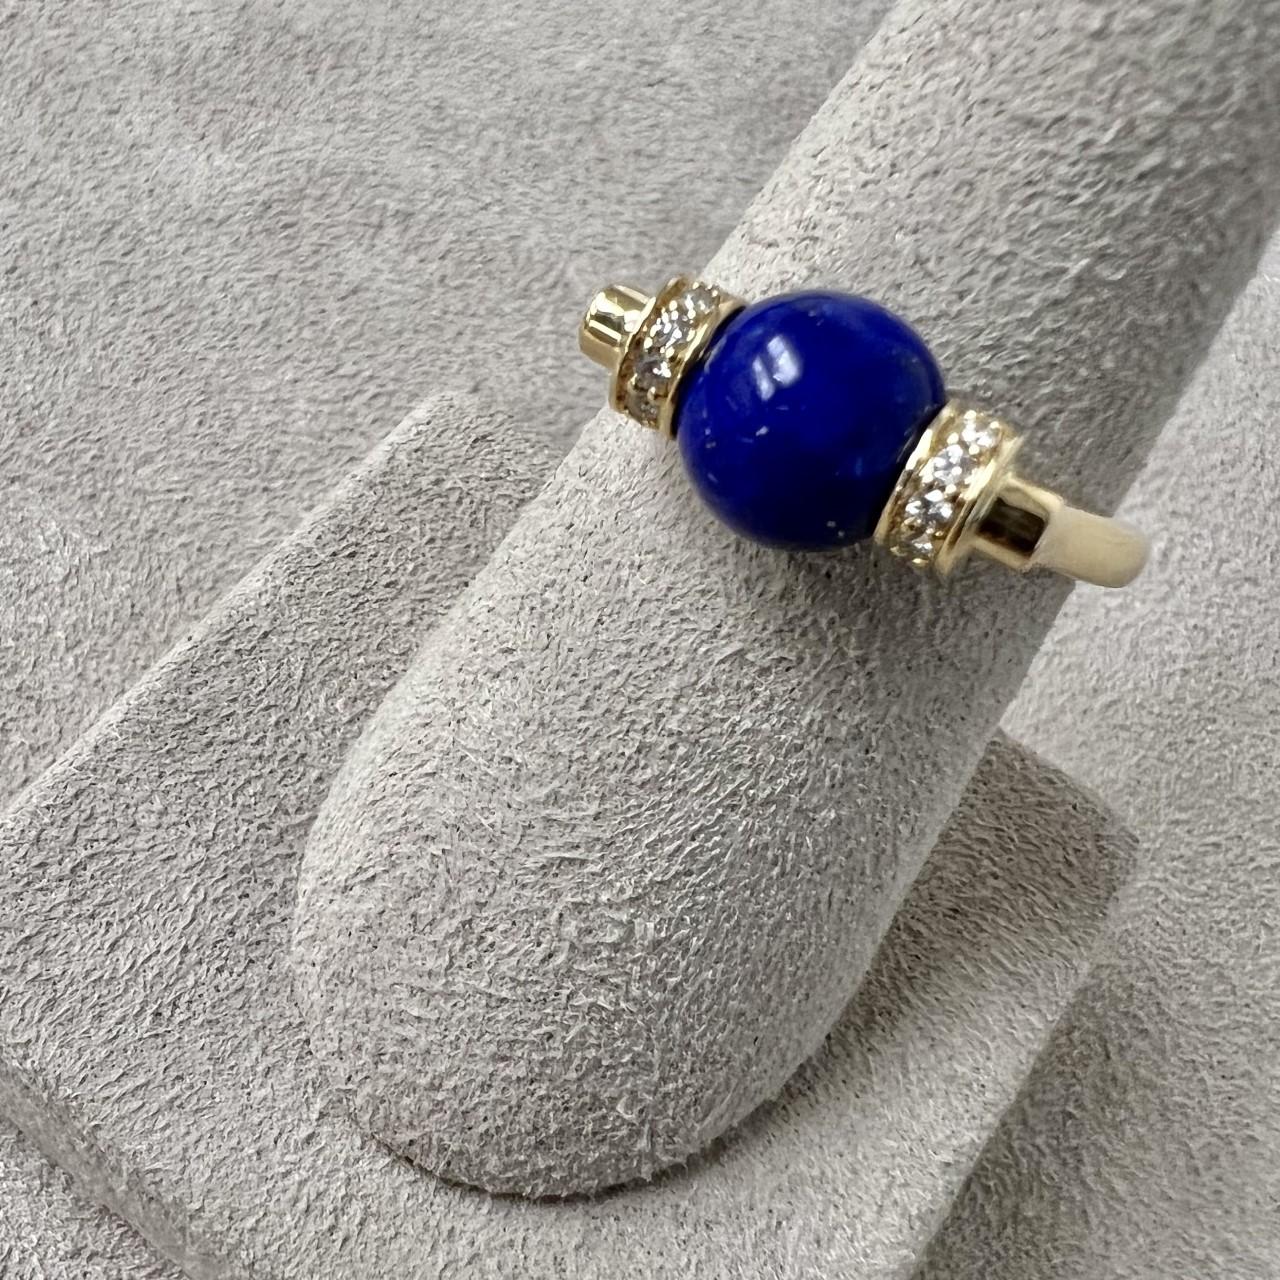 Created in 18 karat yellow gold
Lapis lazuli 3.50 carats approx.
Diamonds 0.15 carat approx.
Ring size US 7, can be made in other ring sizes on special order
Limited edition

Crafted from 18 karat yellow gold, this exclusive piece unites Lapis